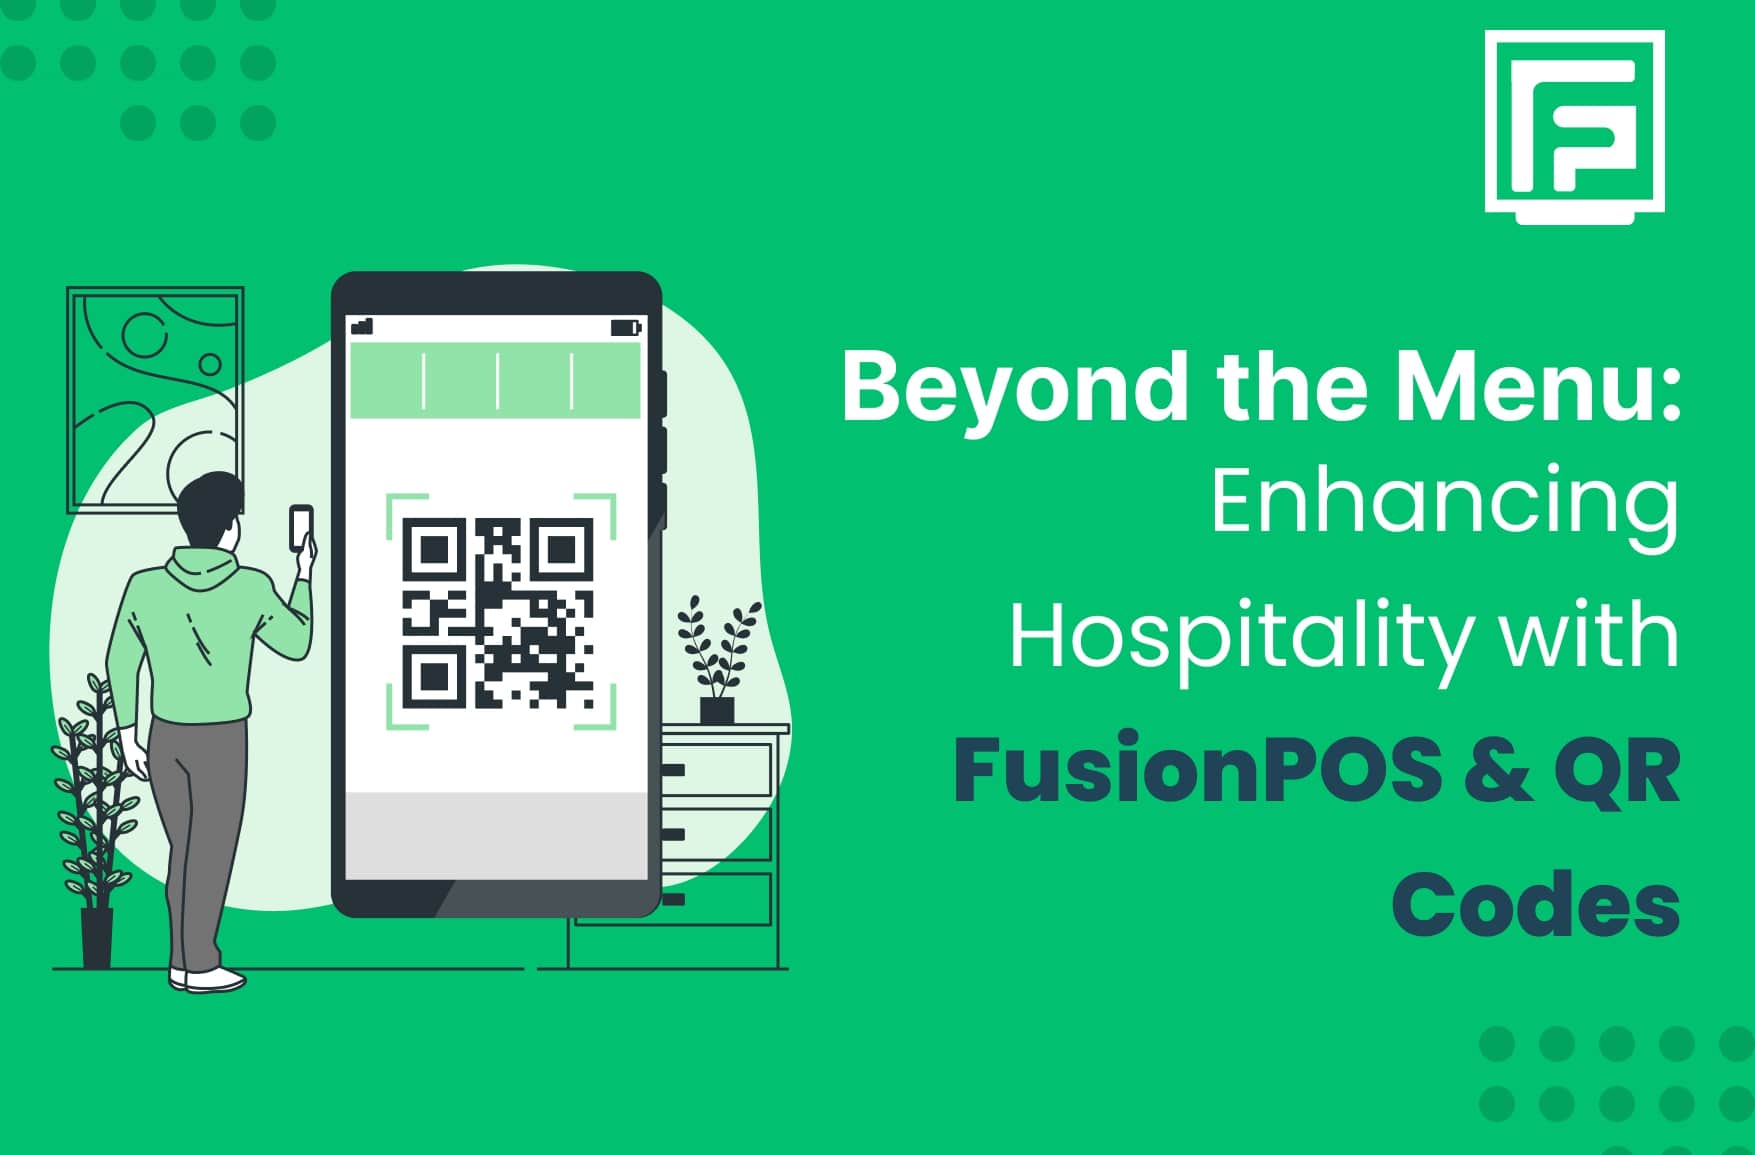 Enhancing Hospitality with FusionPOS and QR Codes